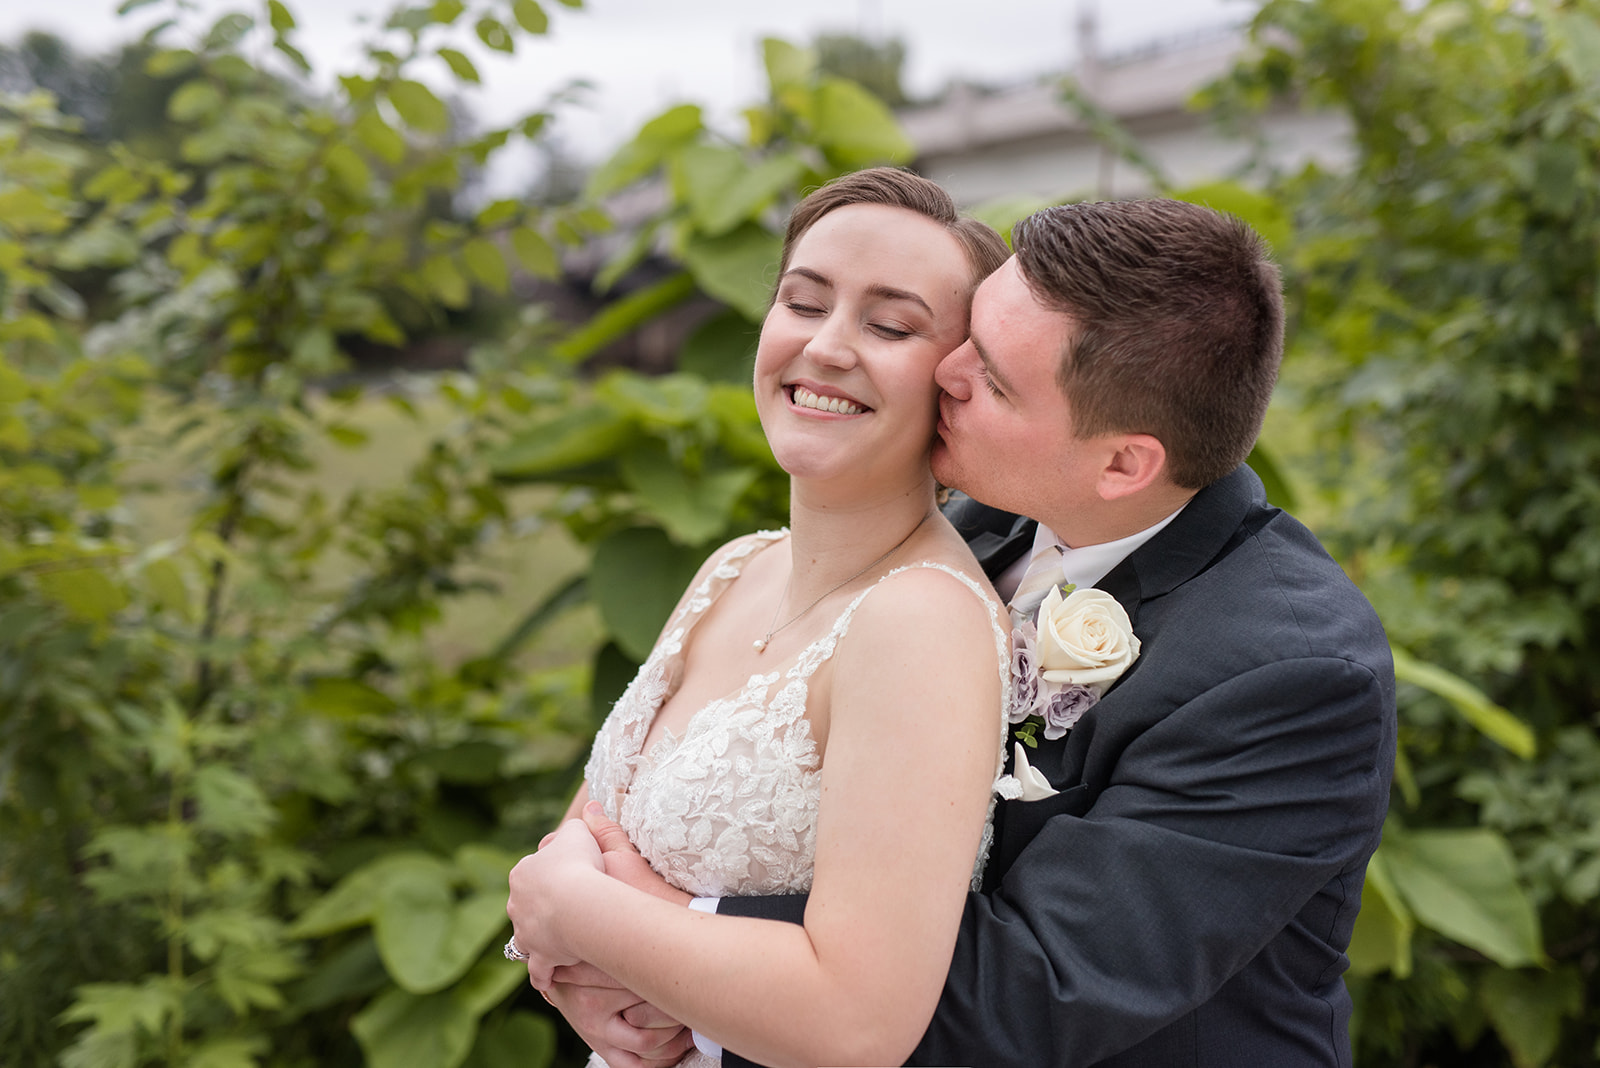 Groom surprises bride with a hug and kiss, making her laugh spontaneously